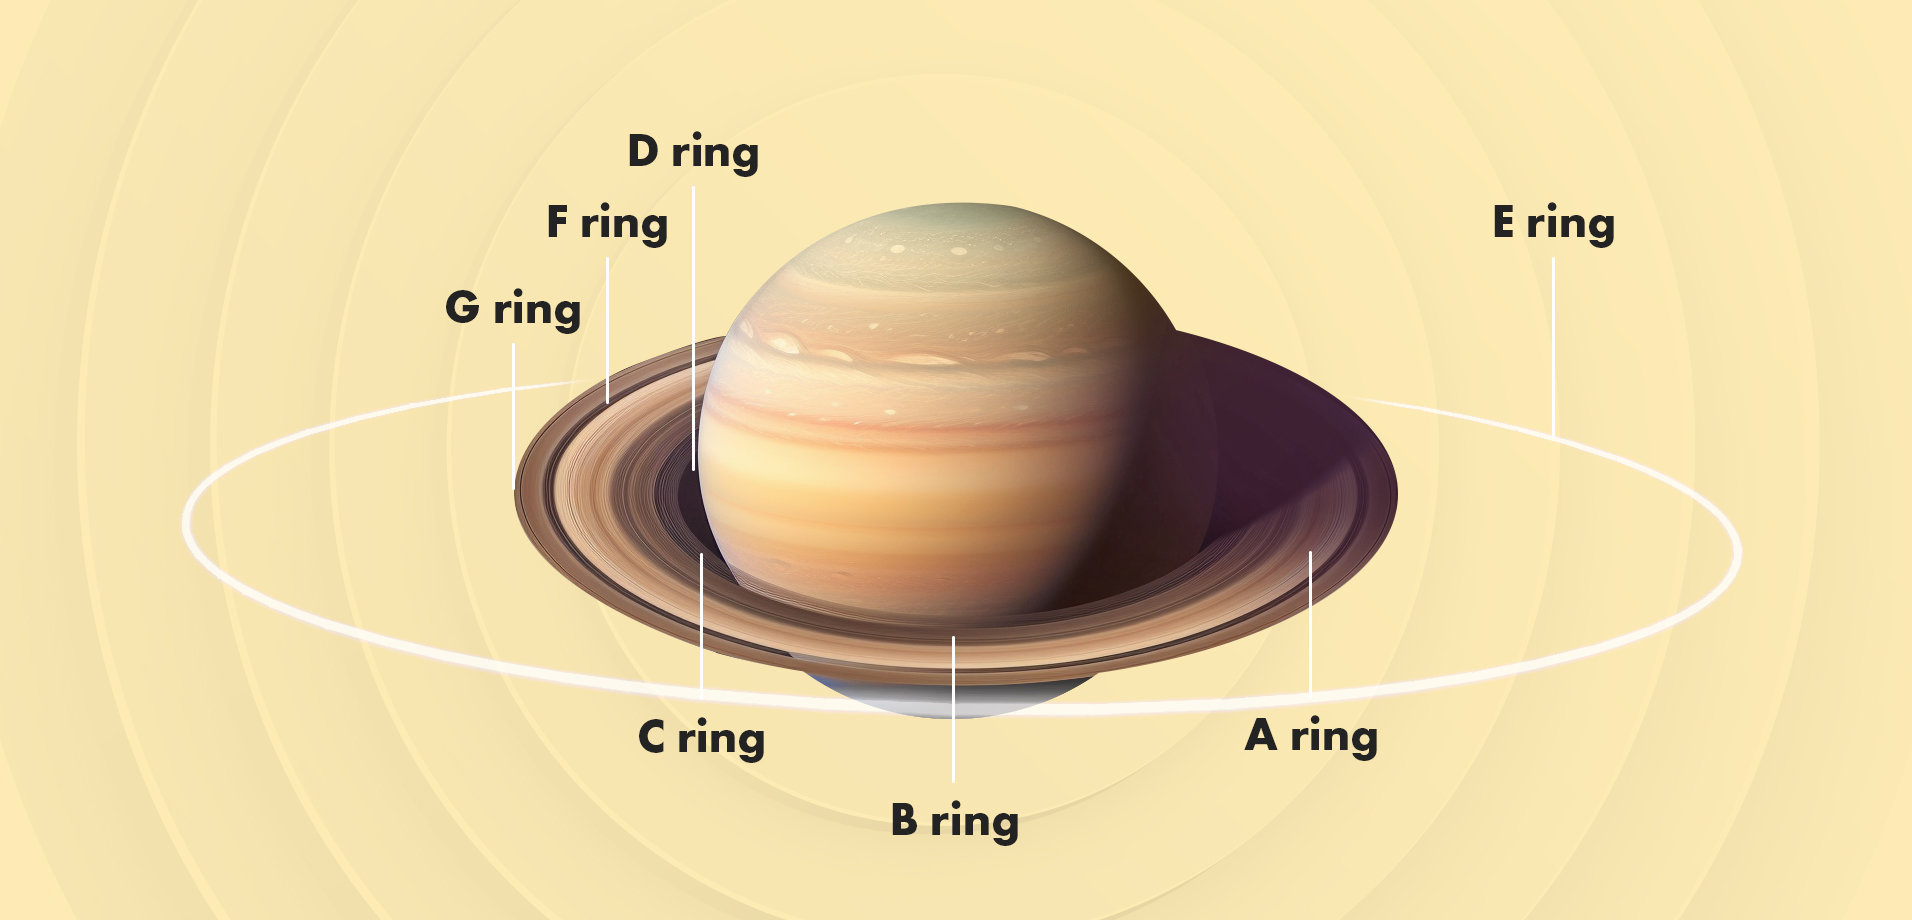 which planets have no rings